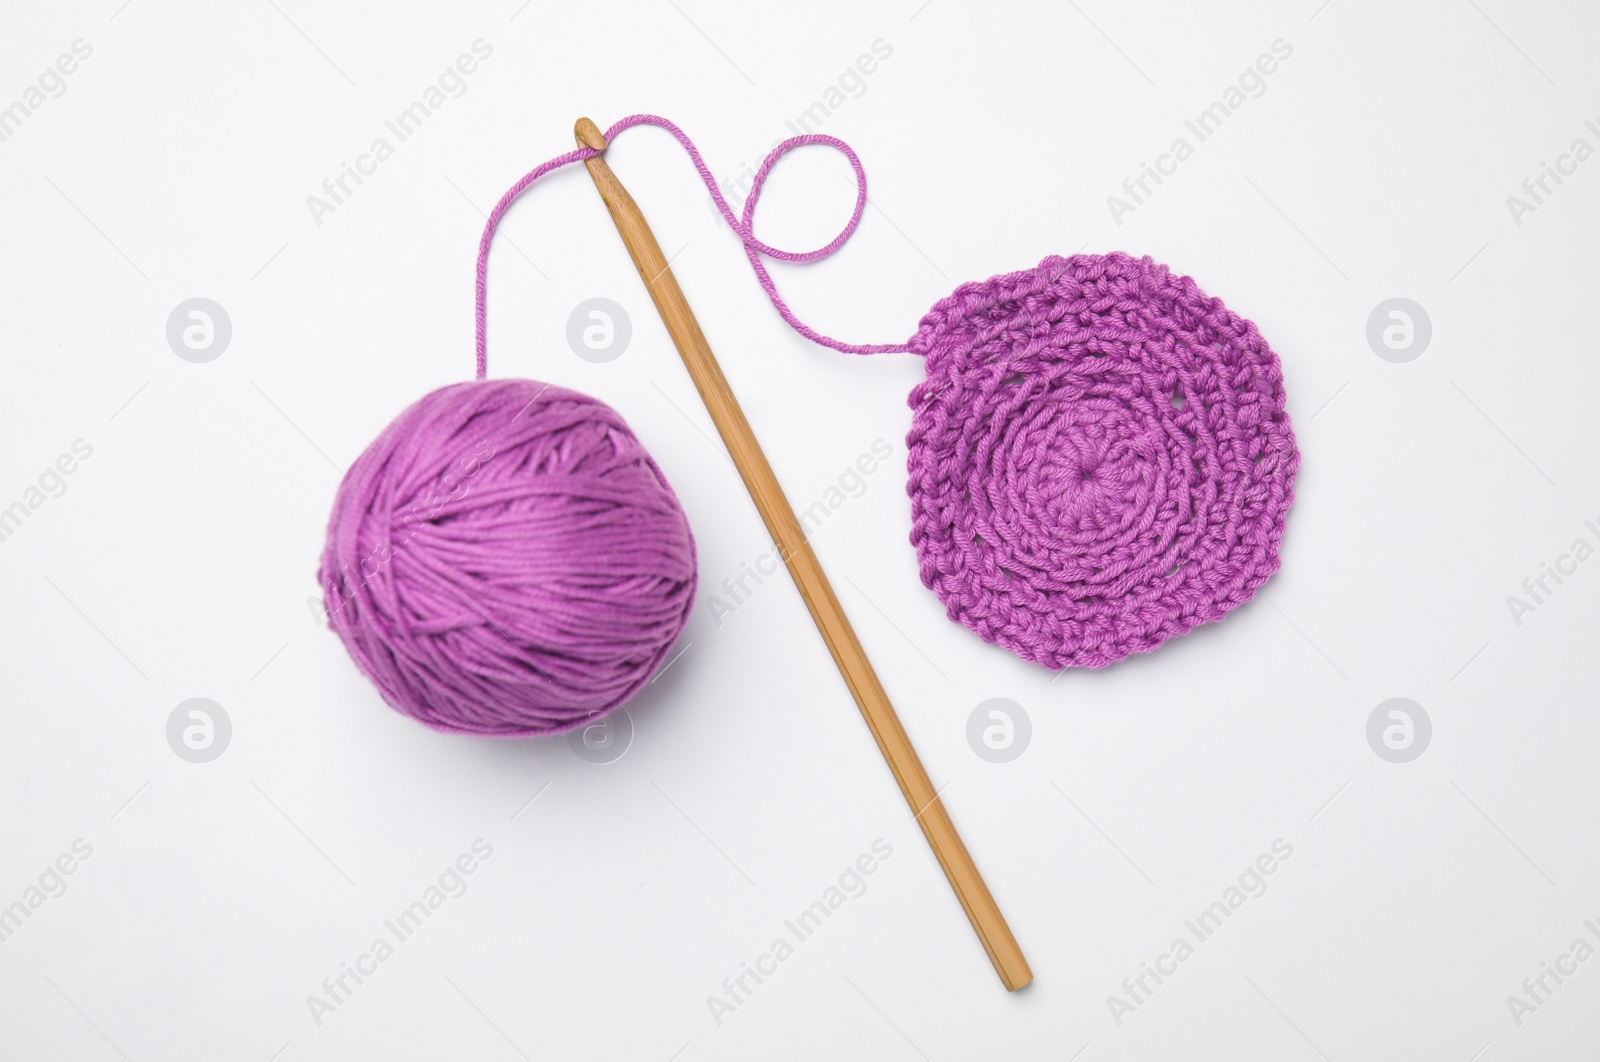 Photo of Soft violet woolen yarn, knitting and crochet hook on white background, top view